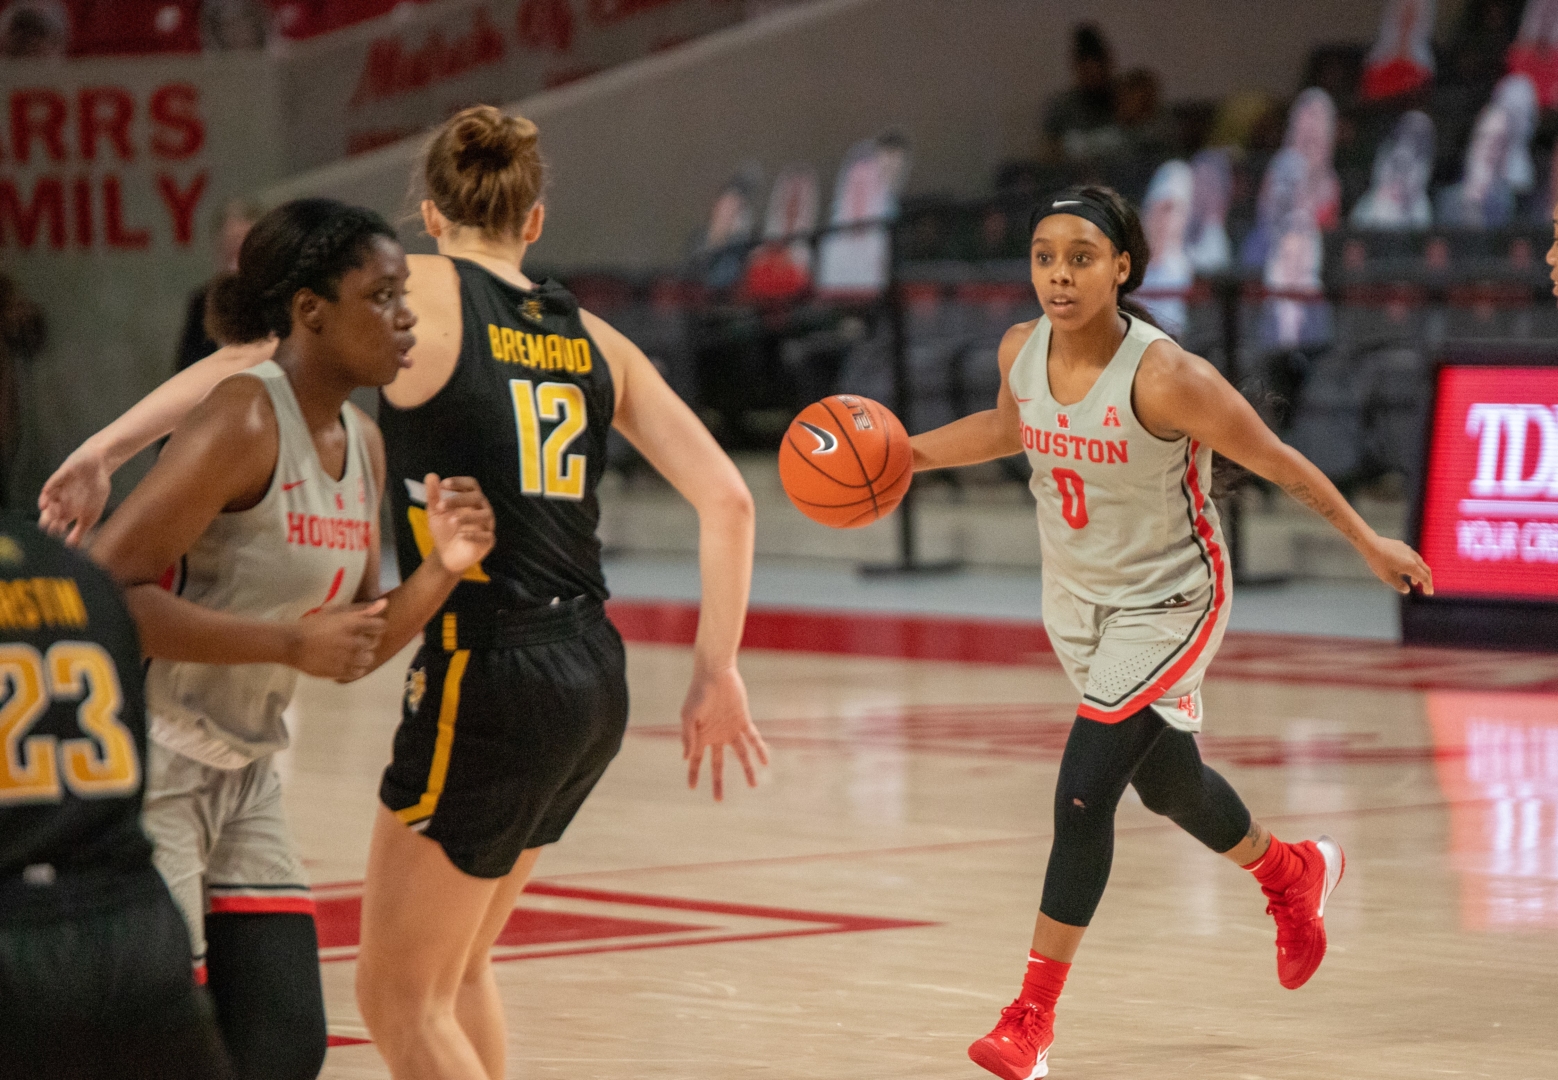 Guard Eryka Sidney dribbles the ball and scans the Wichita State defense in a regular season game on Dec. 30, 2020 at Fertitta Center. She led the UH women's basketball team in scoring against UCF on Sunday with nine points. | Andy Yanez/The Cougar